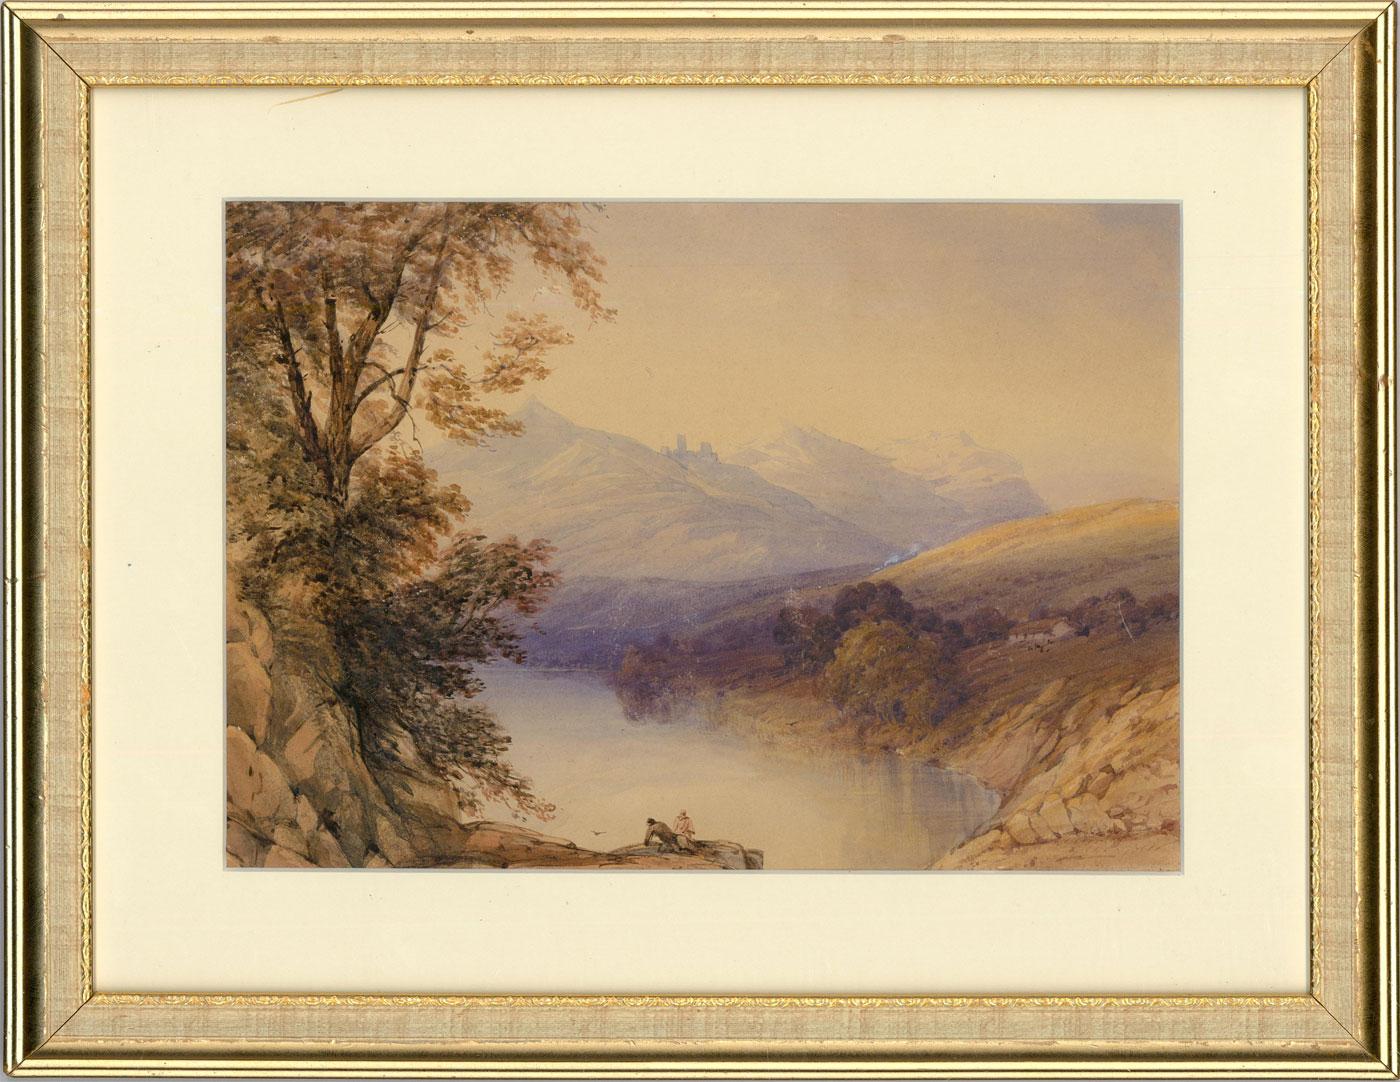 A charming watercolour scene attributed to19th century artist James Duffield Harding (1798-1863). In the foreground a mature tree is growing from rocks to the side of a majestic mountain river. Near centre two figures can be seen knelt, peeking over